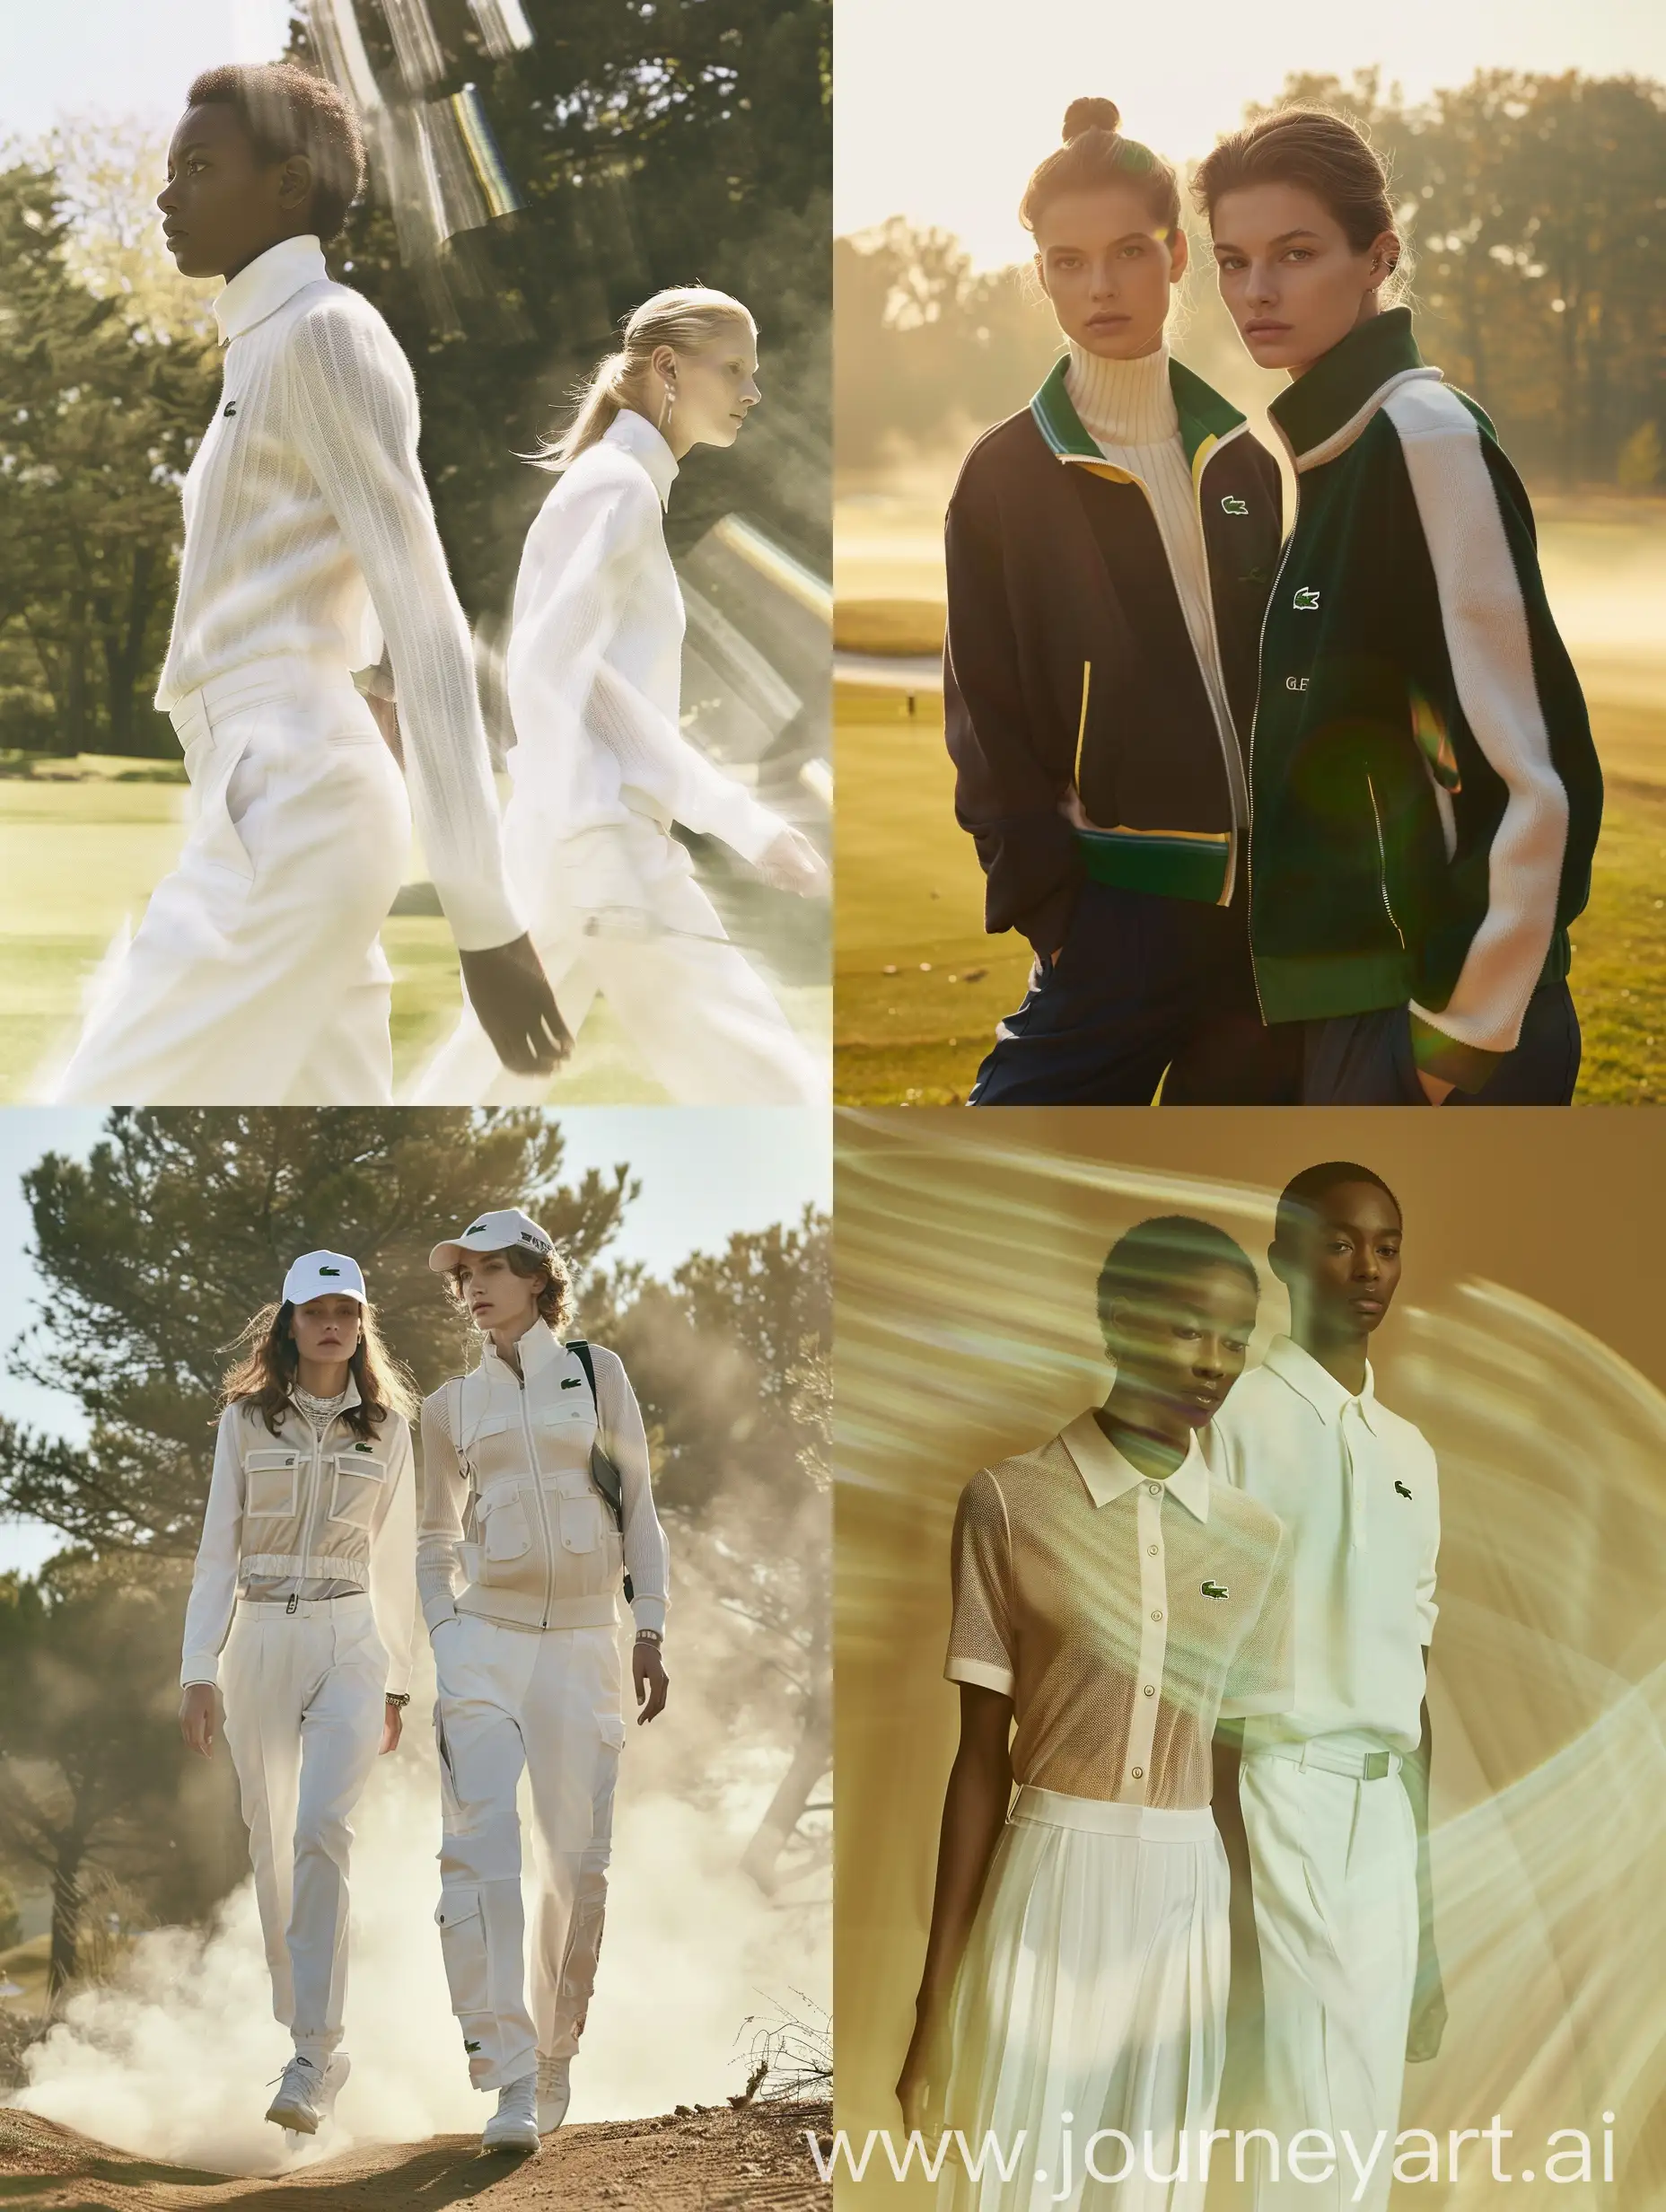 Lacoste-Golf-Style-Fashion-Editorial-Duo-Models-in-HyperRealistic-Cinematic-Atmosphere